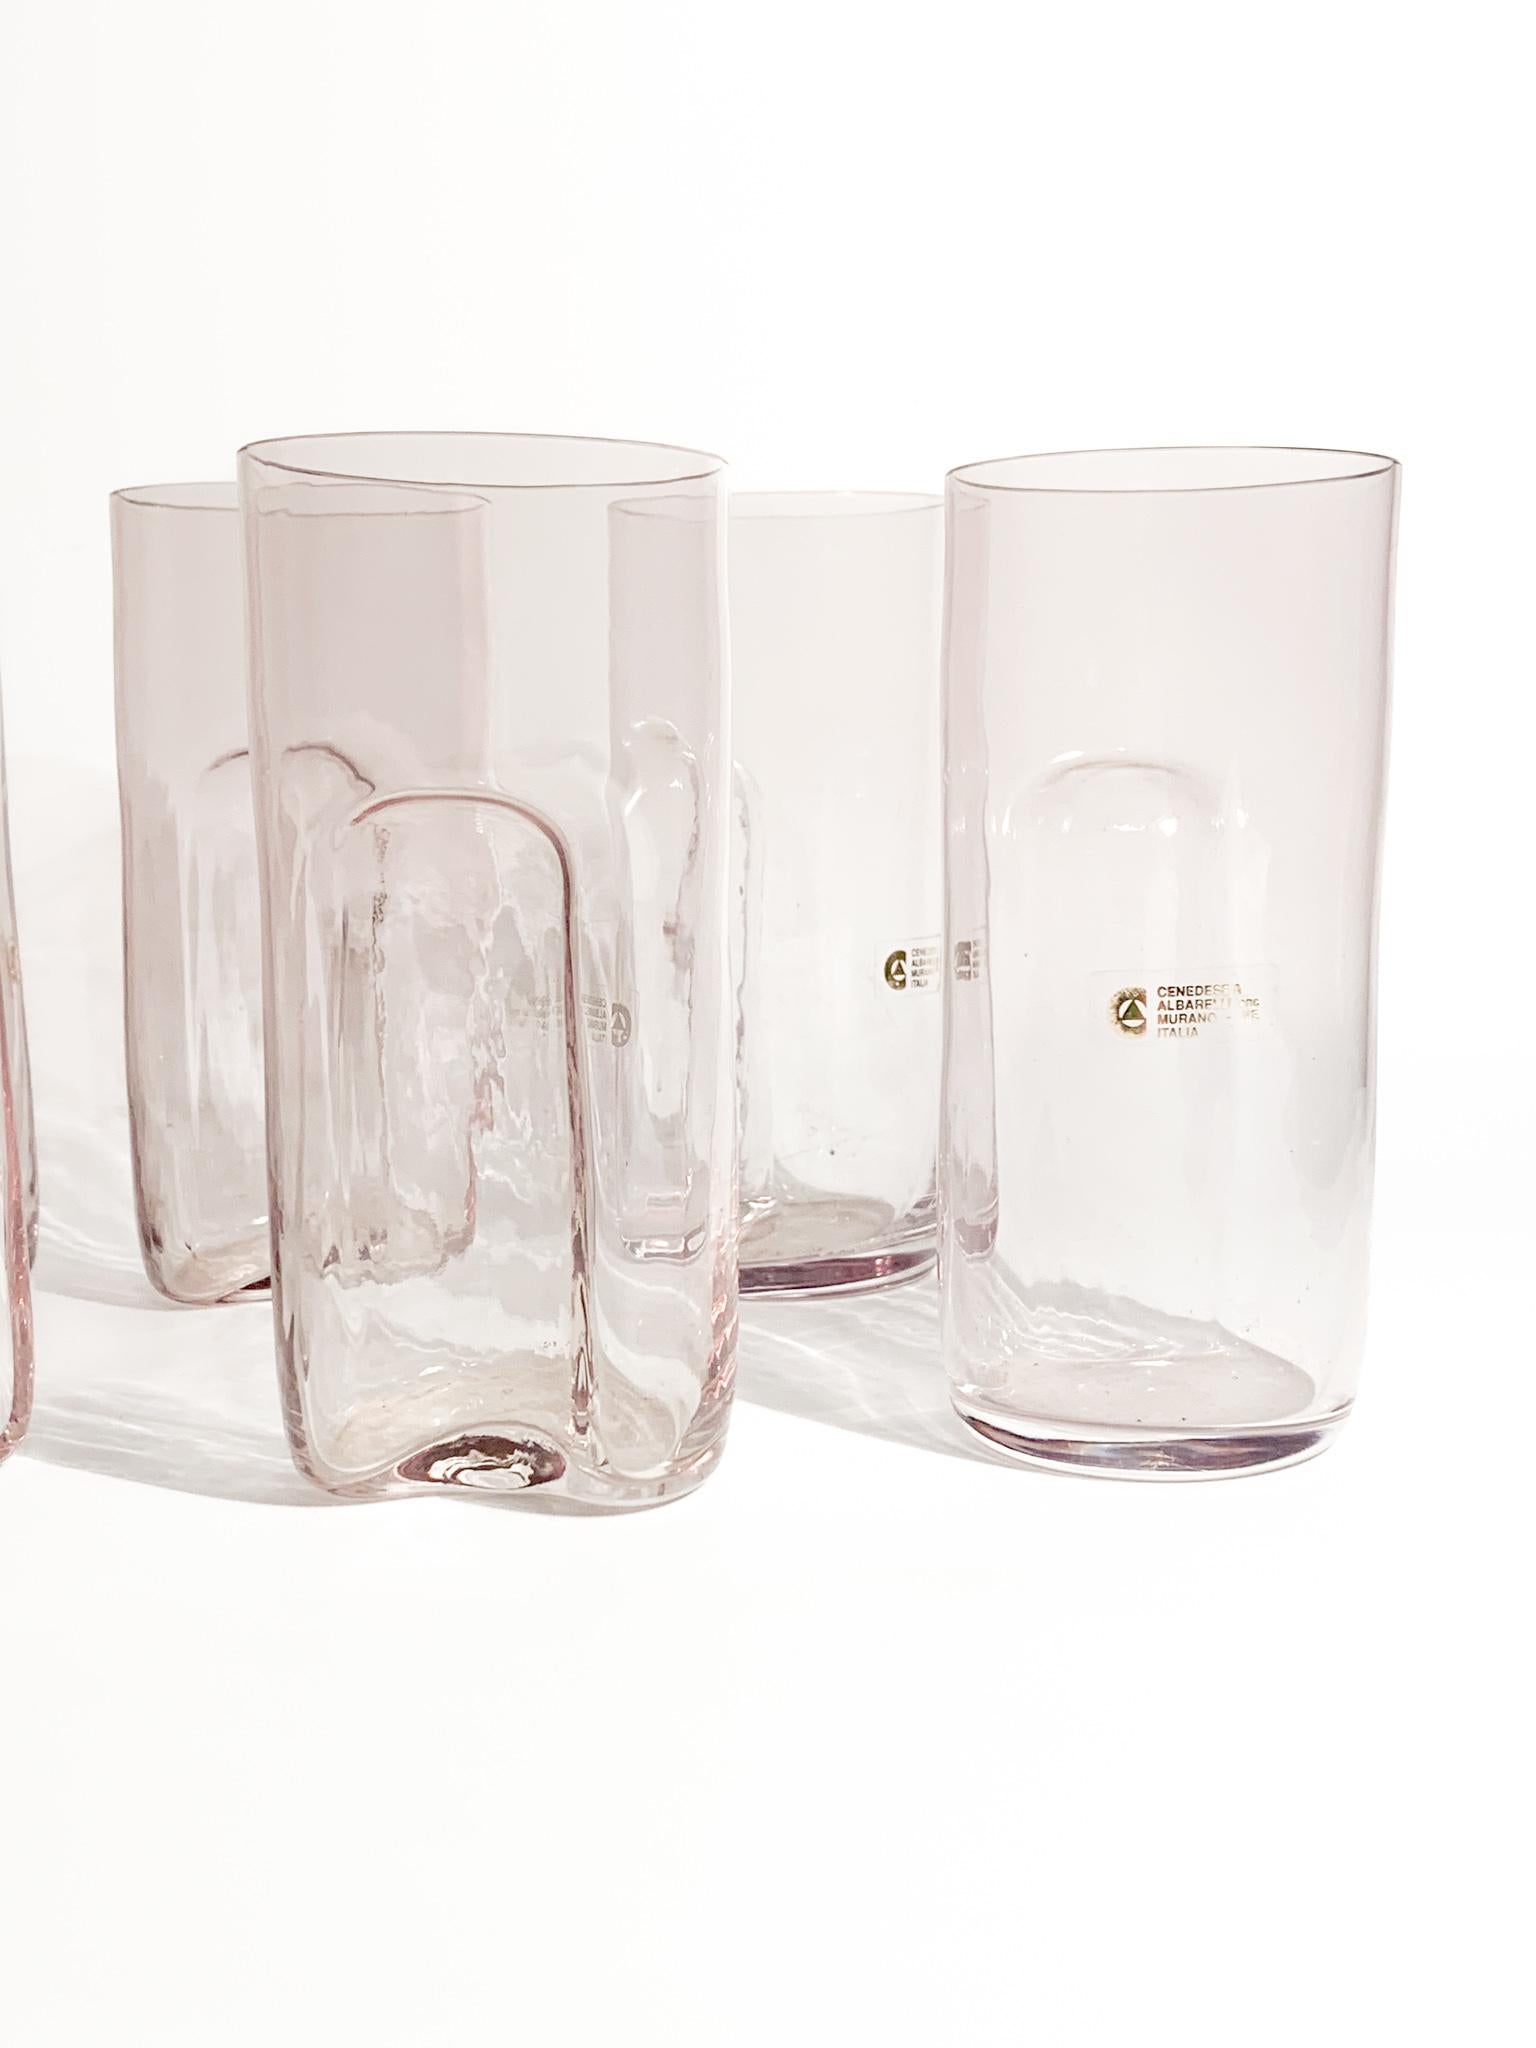 Set of Six Glasses and Carafe in Murano Glass by Cenedese and Albarelli 1970s For Sale 1